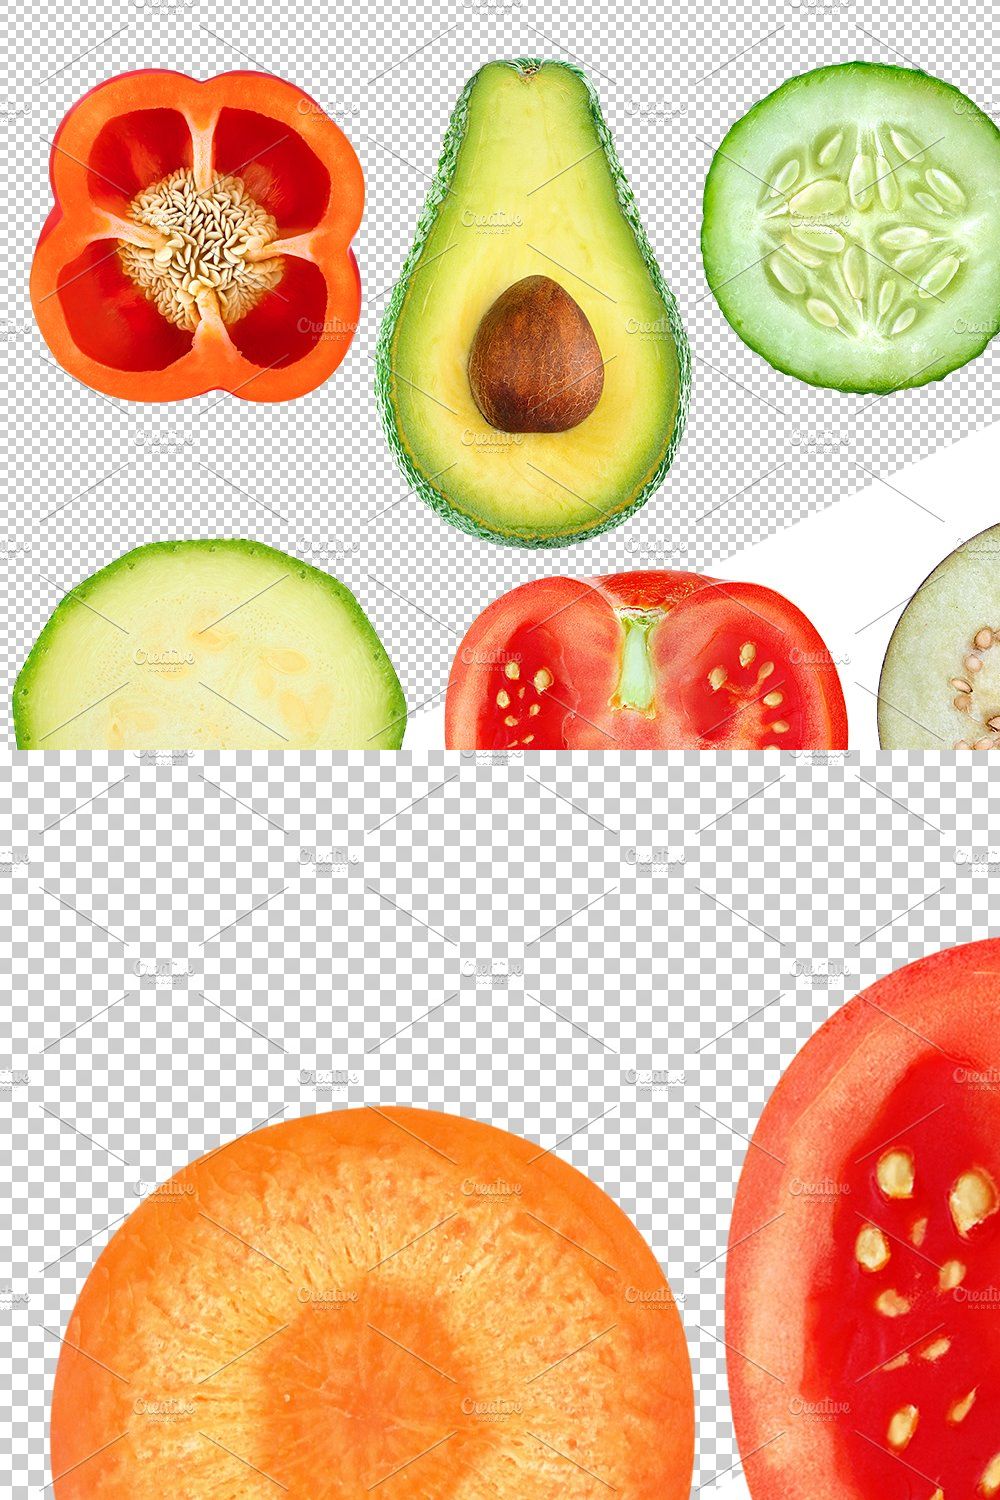 Vegetable slices pinterest preview image.